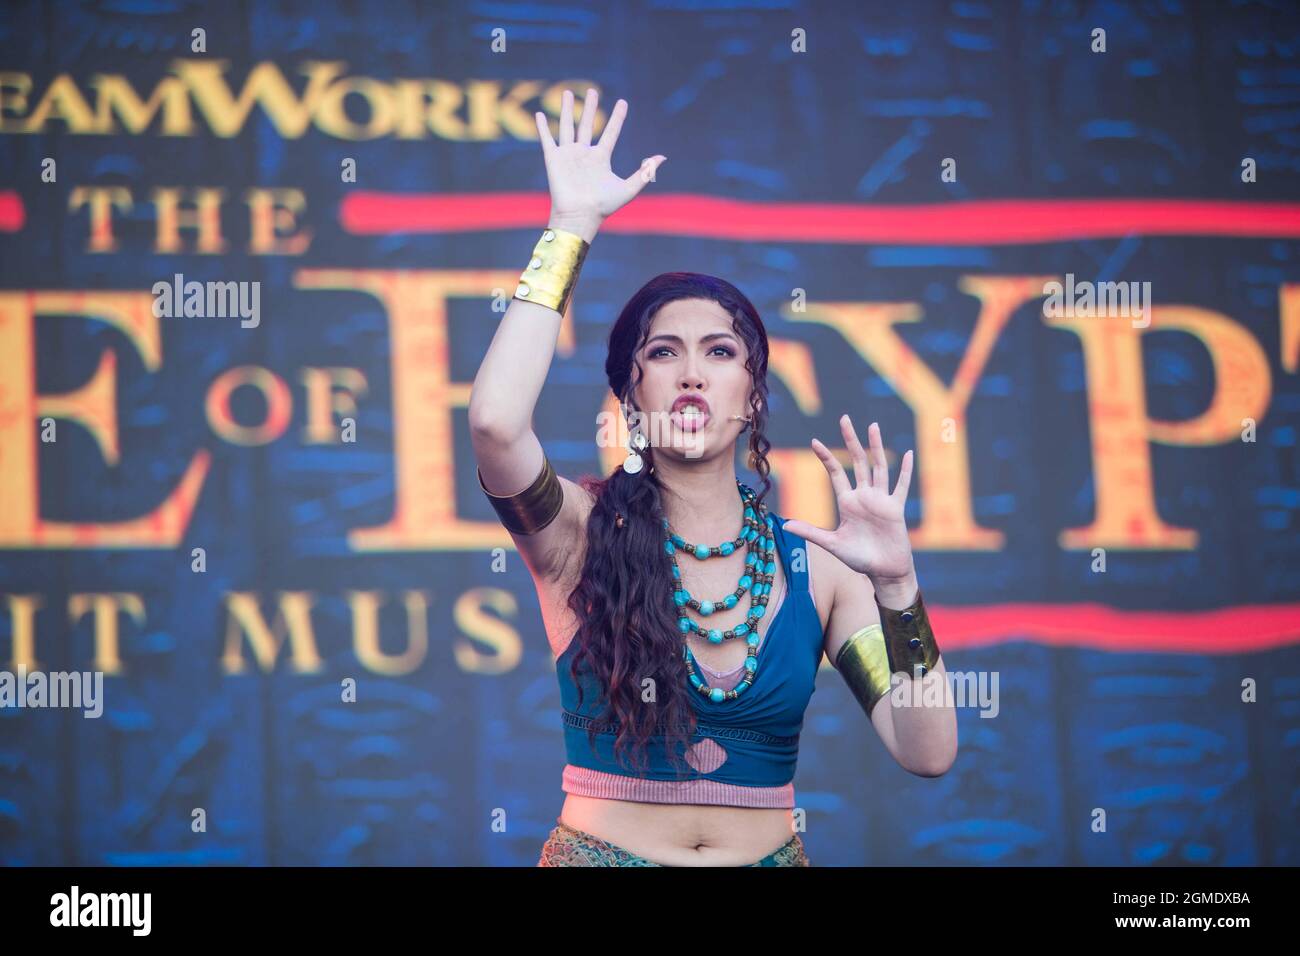 London, UK. 18 Sep 2021  The Prince of Egypt. West End Live  The show that  features free performances from London’s most celebrated West End musicals, live and free in Trafalgar Square. Paul Quezada-Neiman/Alamy Live News Stock Photo